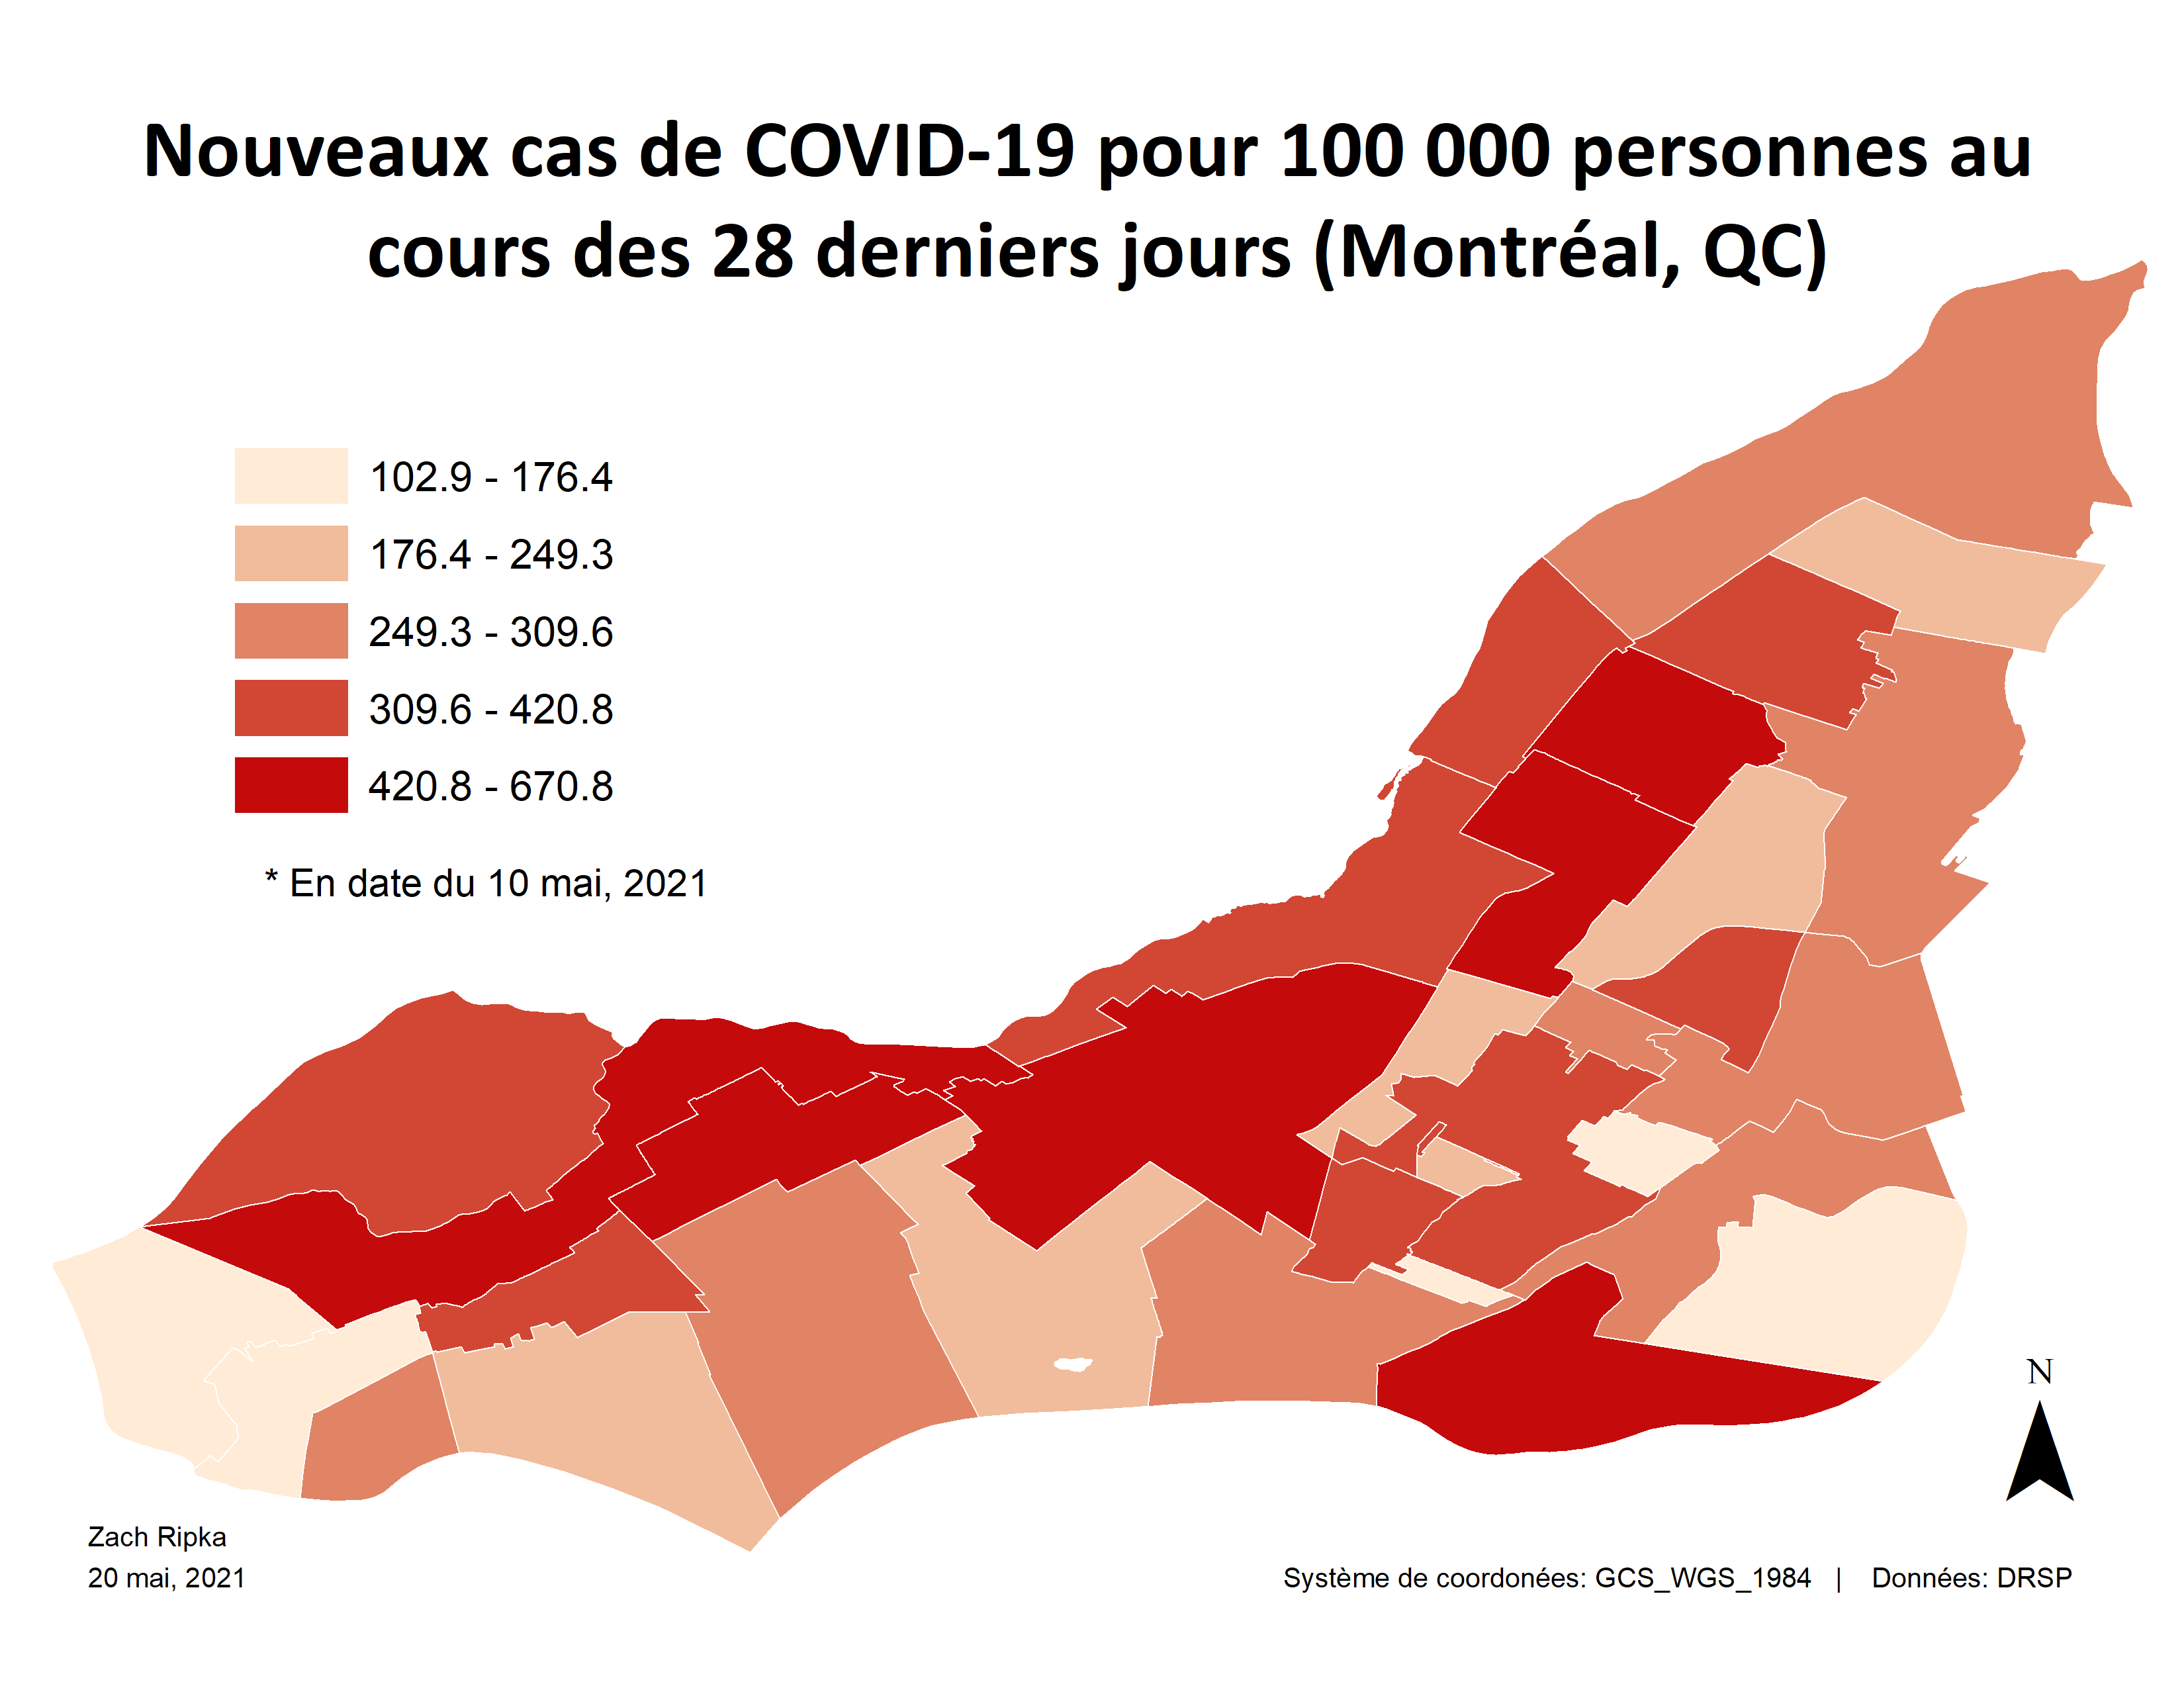 a map showing COVID-19 infection rates across the island of Montreal